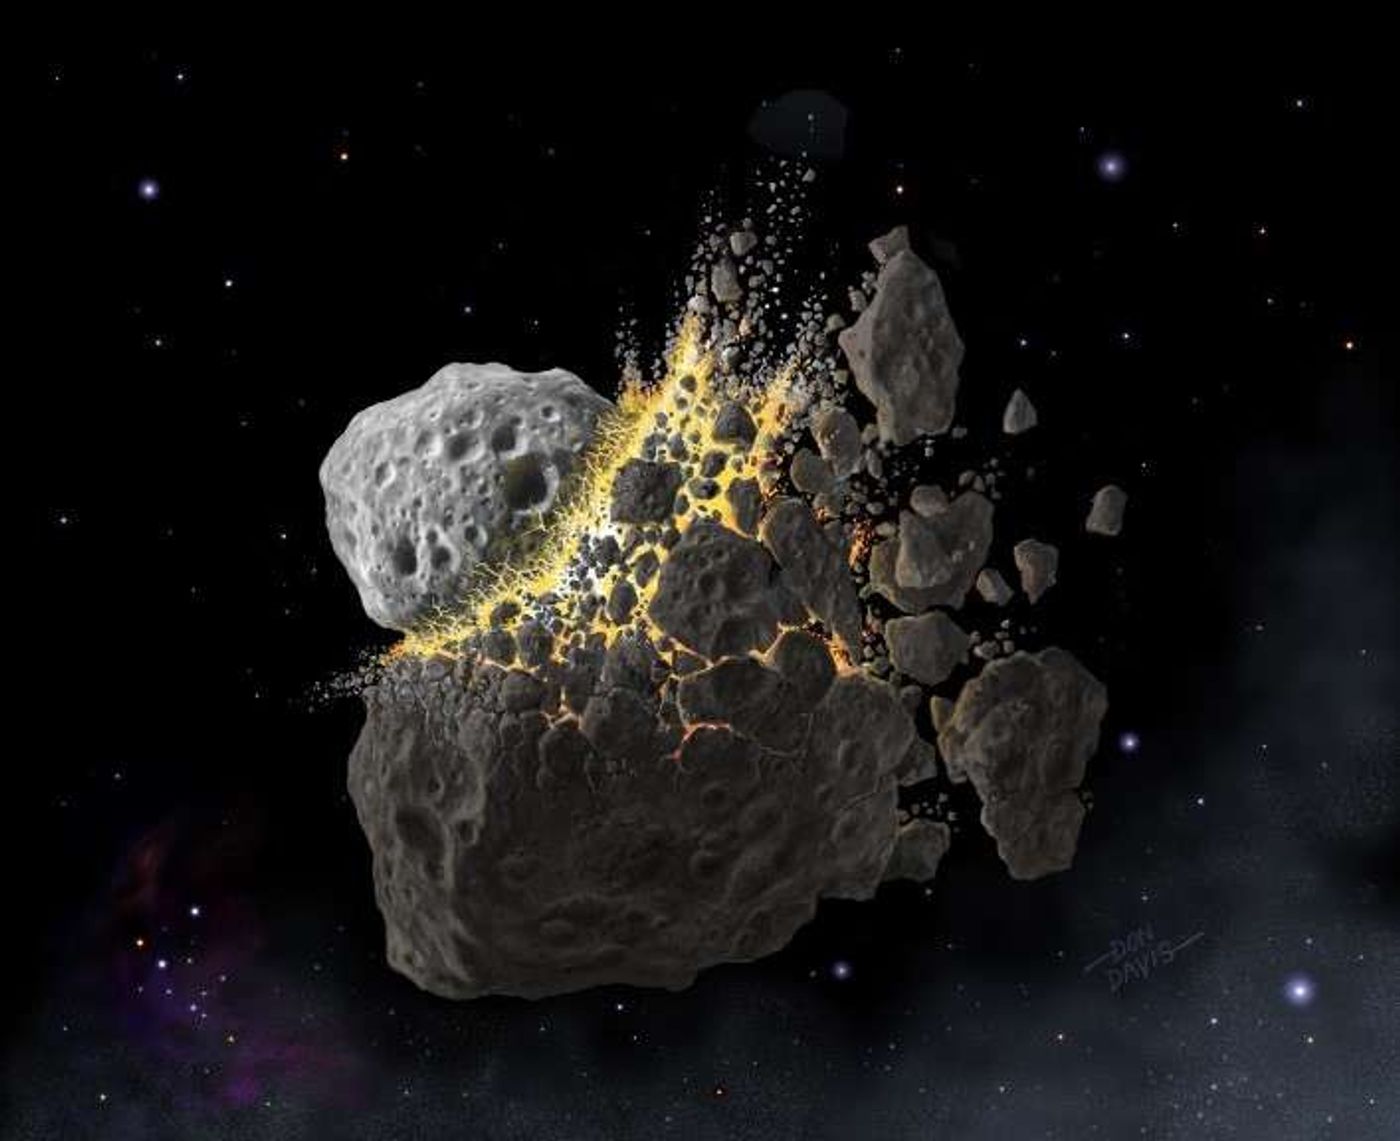 A space rock collision that took place 466 million years ago could have changed the types of meteorites that collided with Earth for millions of years.